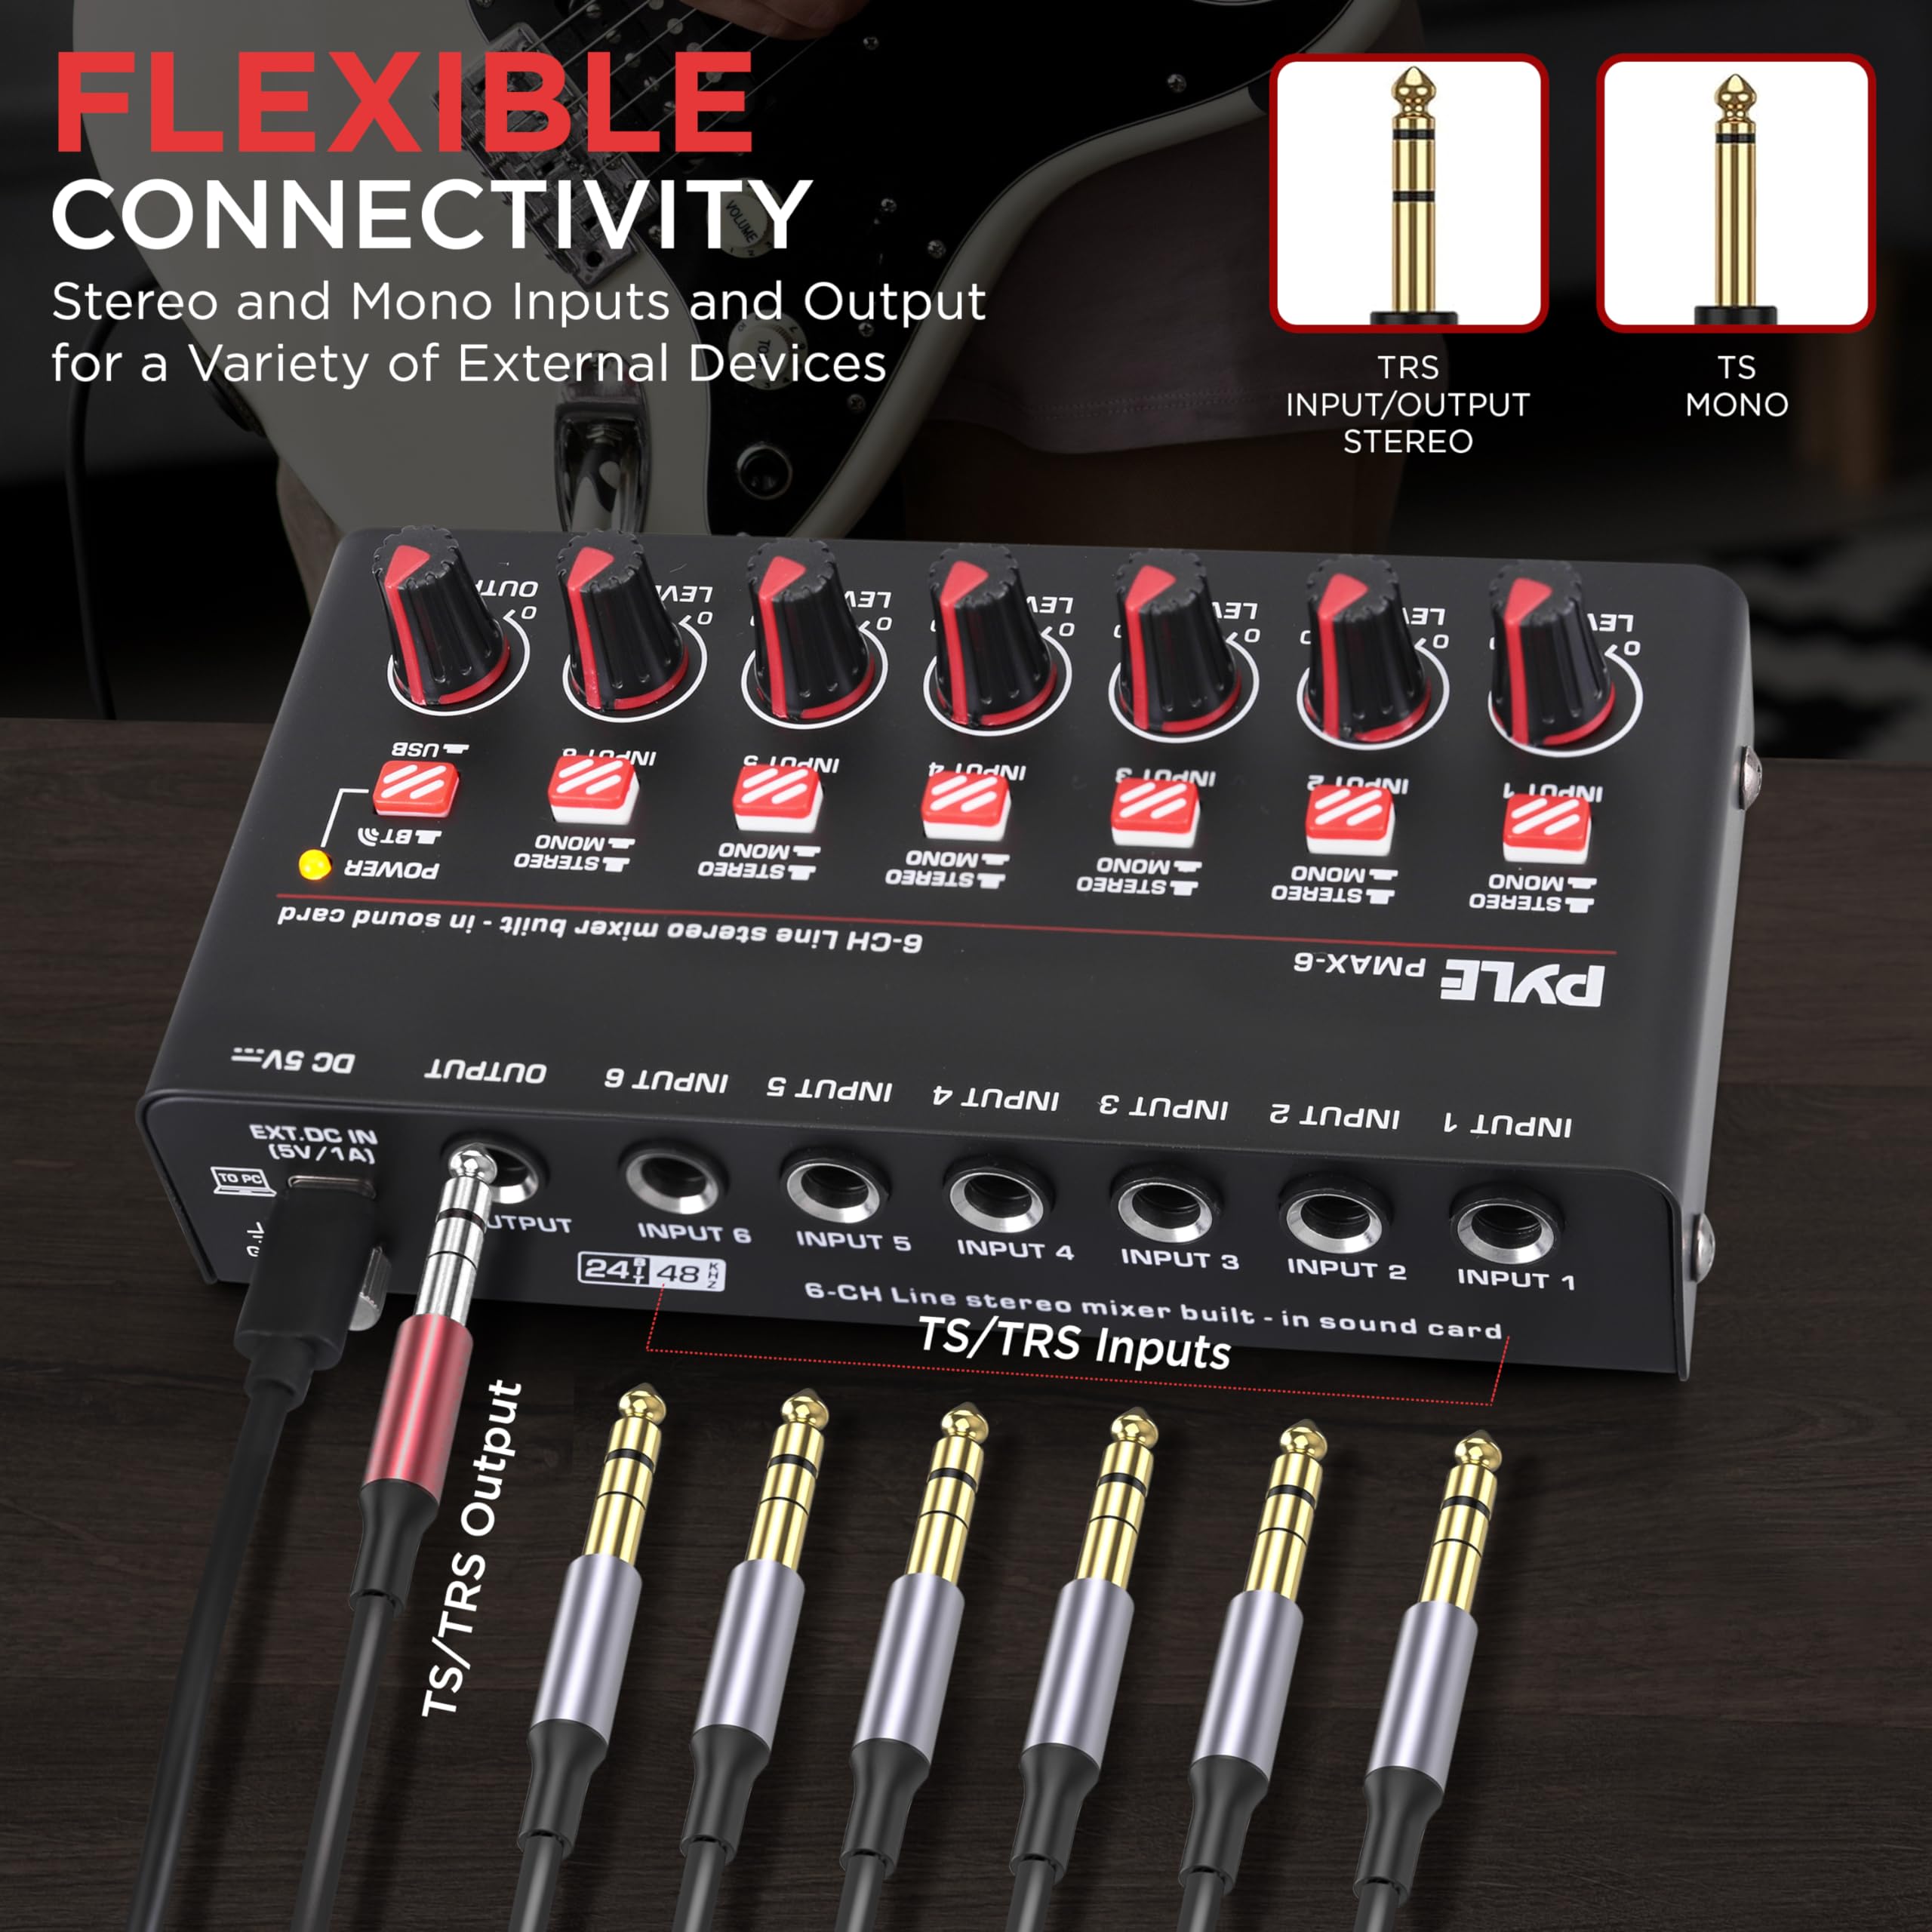 6-Channel Wireless BT Streaming Mini Line Mixer with USB Audio Interface - 6 Mono/Stereo Switching Inputs | Ultra-low Noise Design with High Headroom | Built-in USB Sound Card